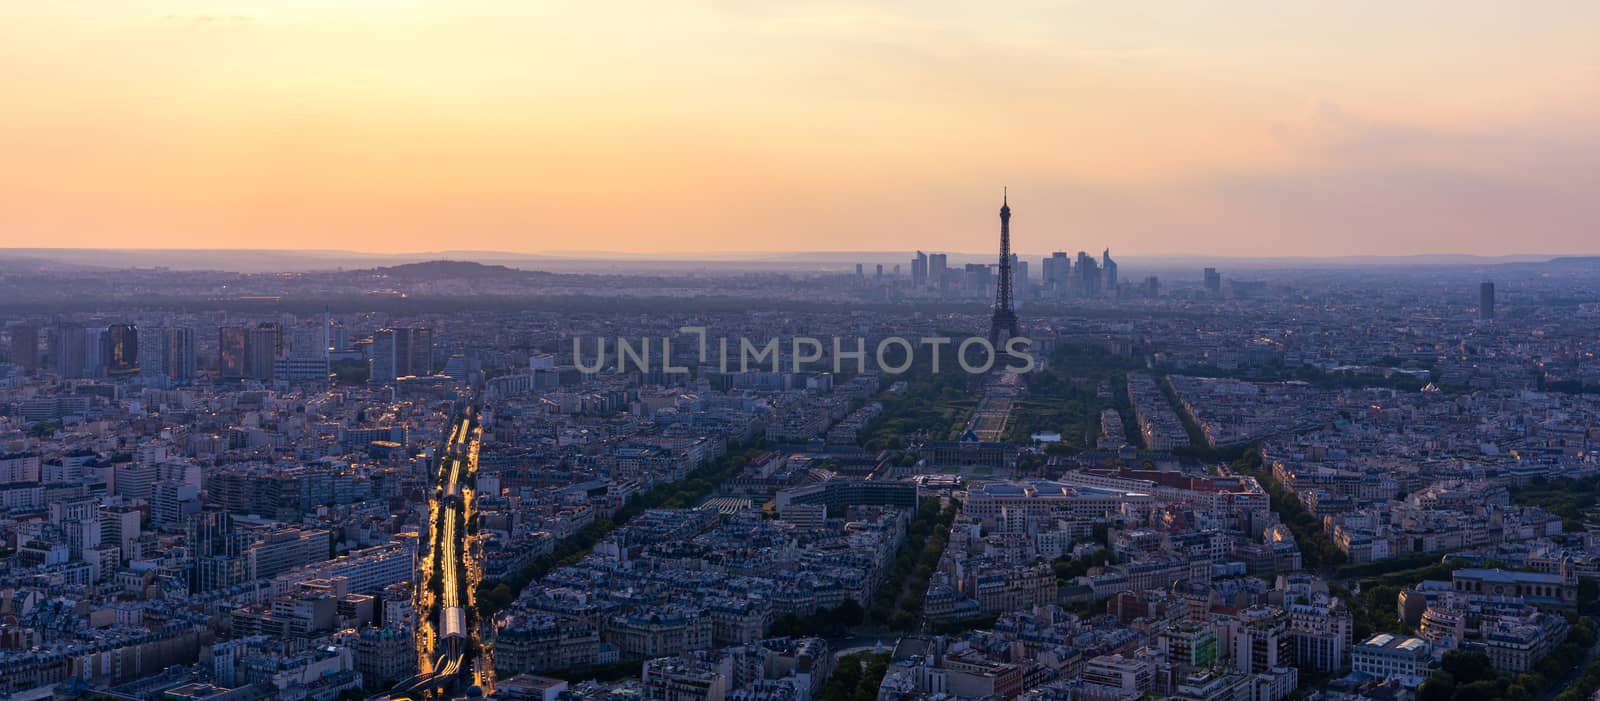 Panoramic aerial view of Paris, Eiffel Tower and La Defense business district. Aerial view of Paris at sunset. Panoramic view of Paris skyline with Eiffel Tower and La Defense. Paris, France. 